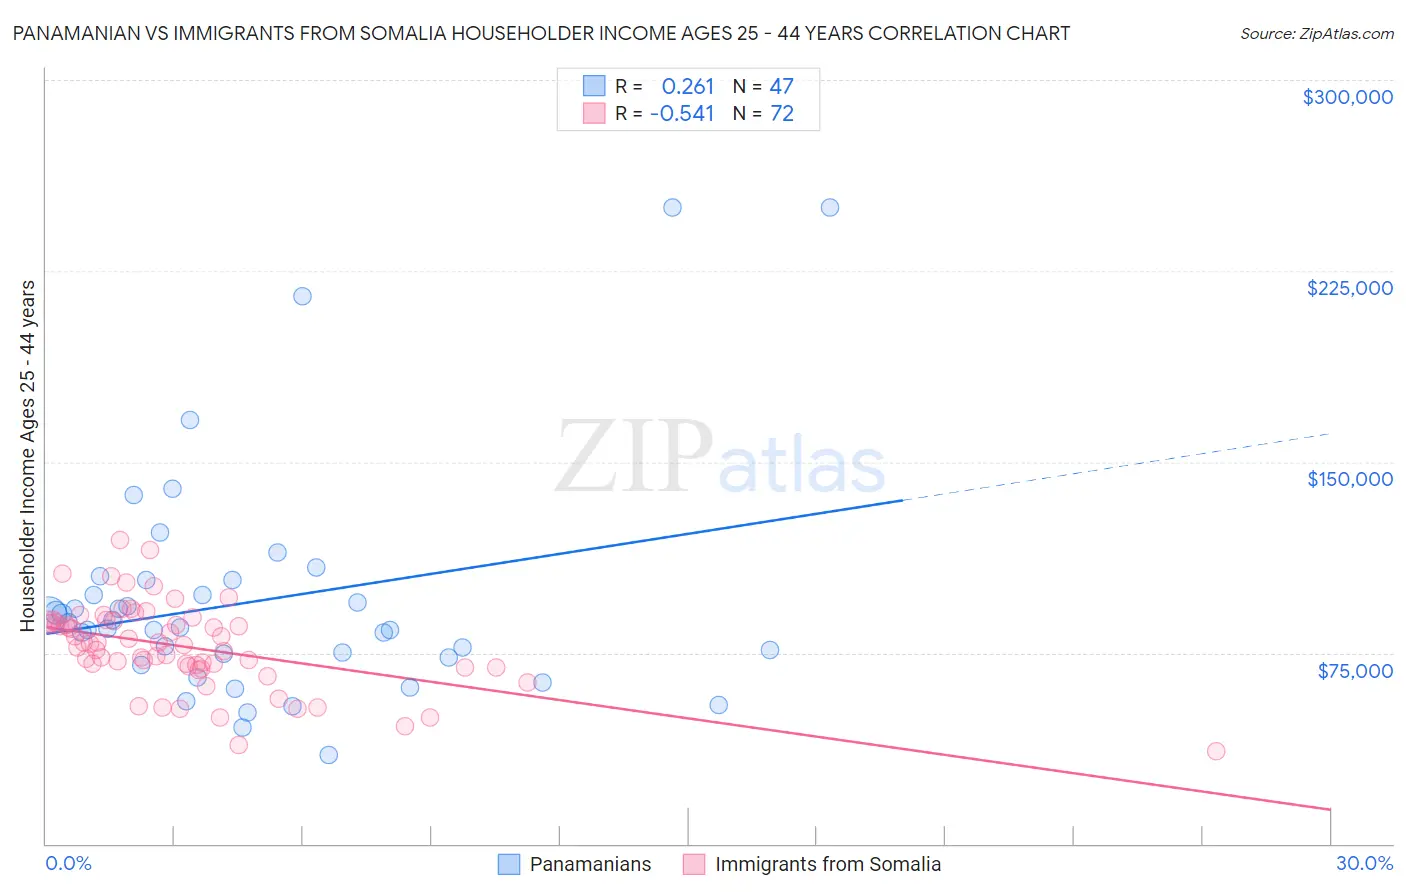 Panamanian vs Immigrants from Somalia Householder Income Ages 25 - 44 years